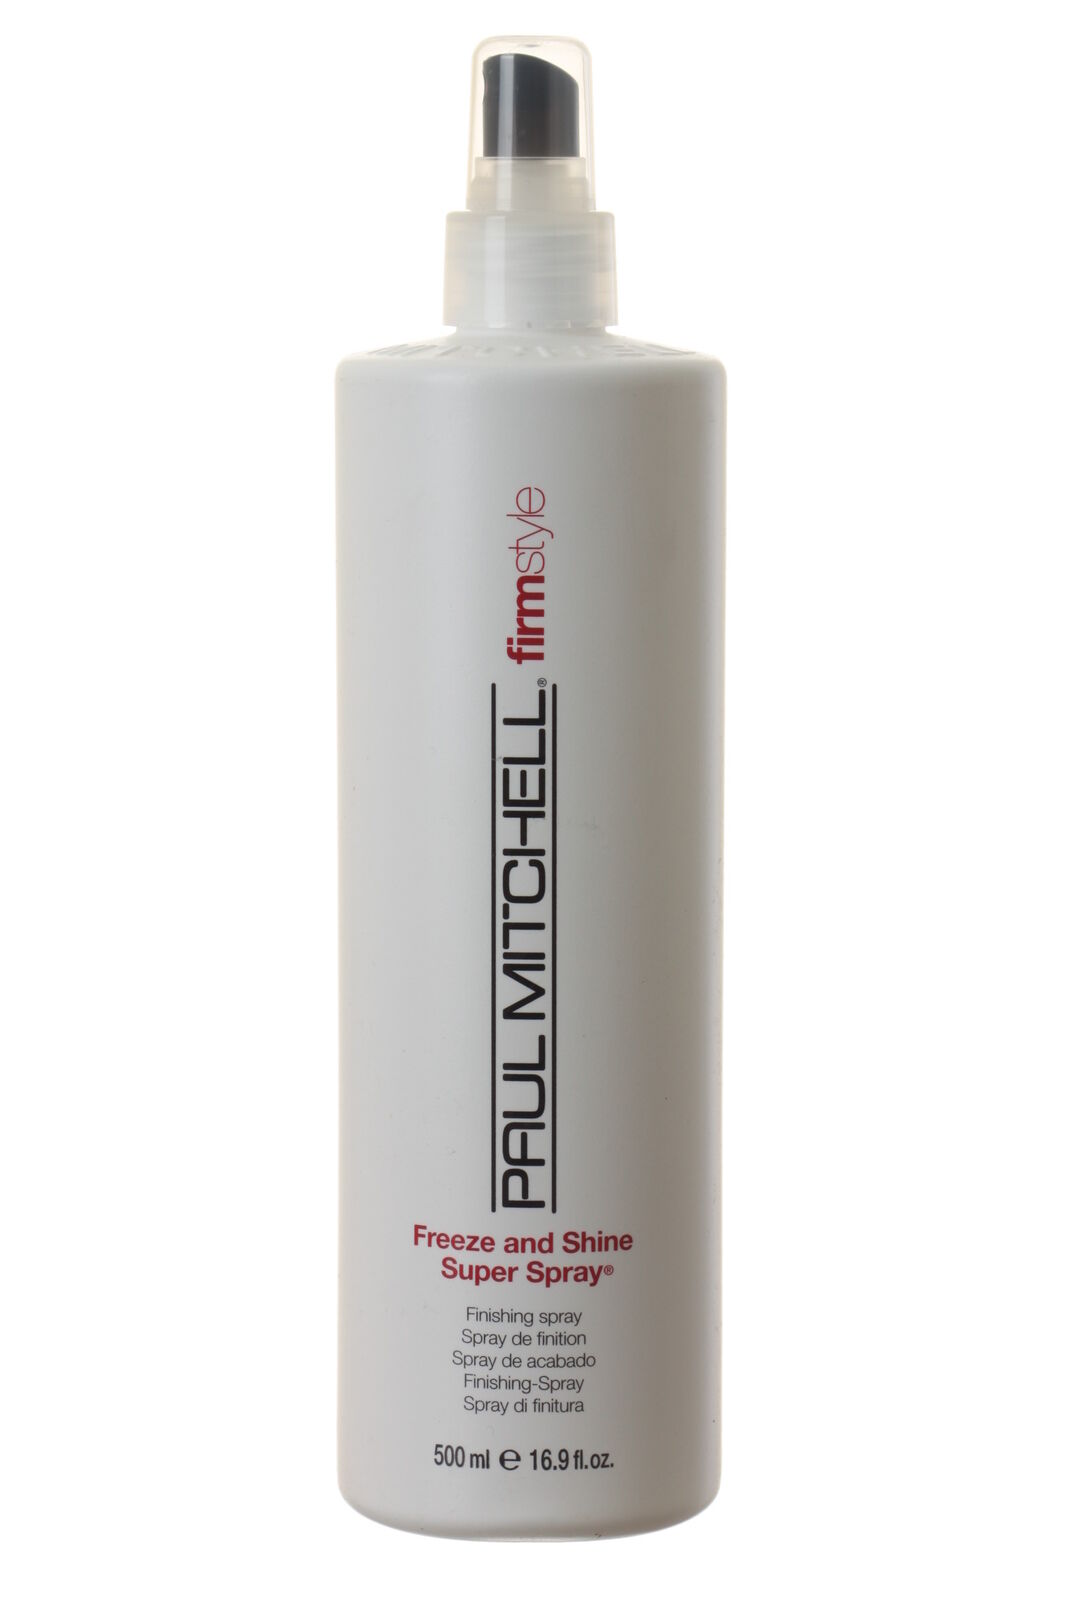 Paul Mitchell Freeze and Shine Spray, 16.9-Ounces Bottle